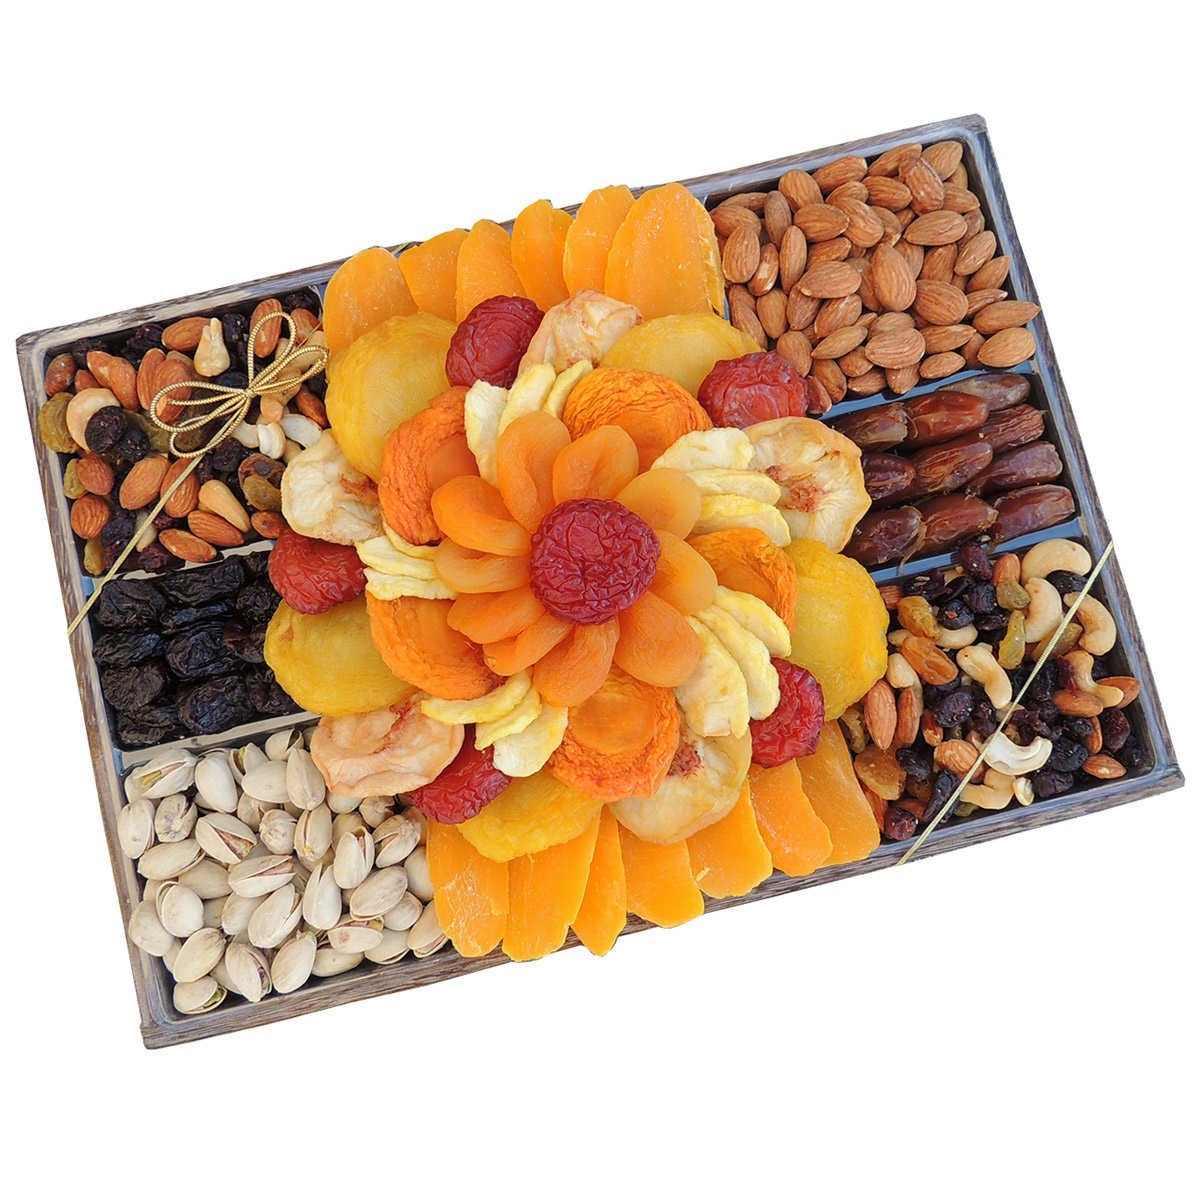  Fruit Tray Clear Snack Display Tray, Candy Snack Tray Nut and  Dried Fruit Storage Box, Party Snack Platter, Snack Tray for Kitchen and  Party Food and Pantry Organization : Home 